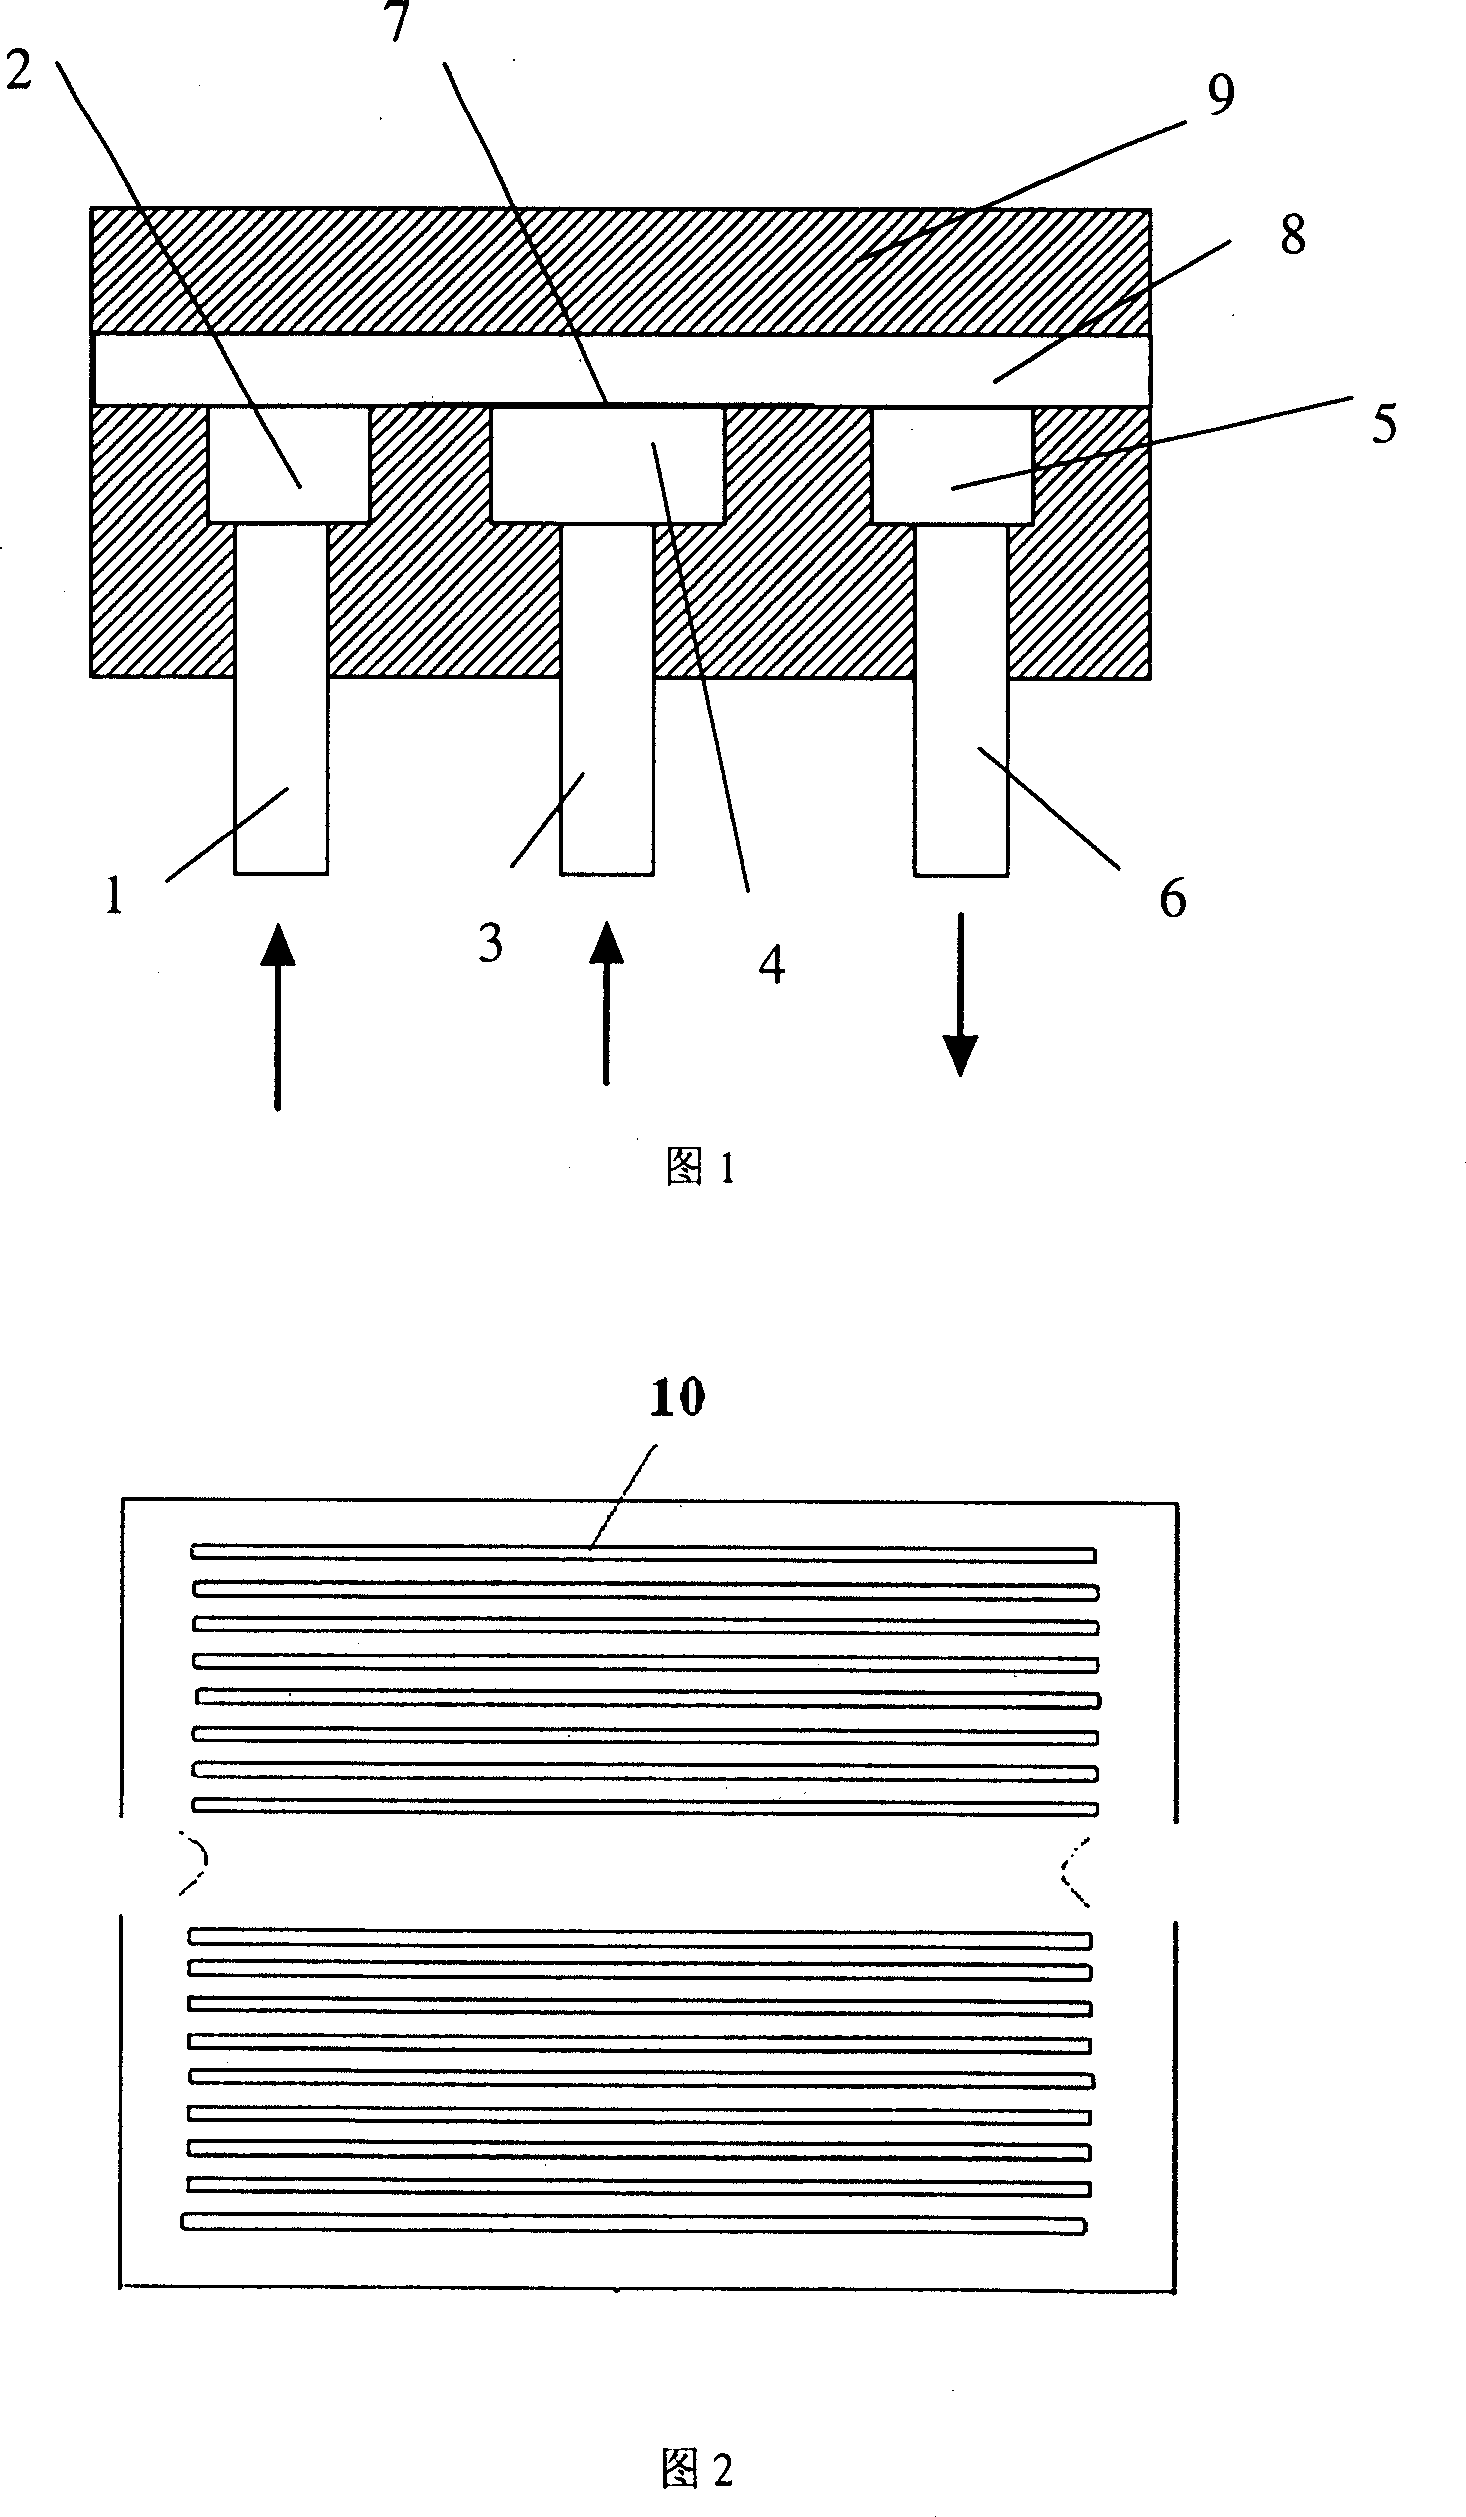 Multi-channeled micro-structured reactor